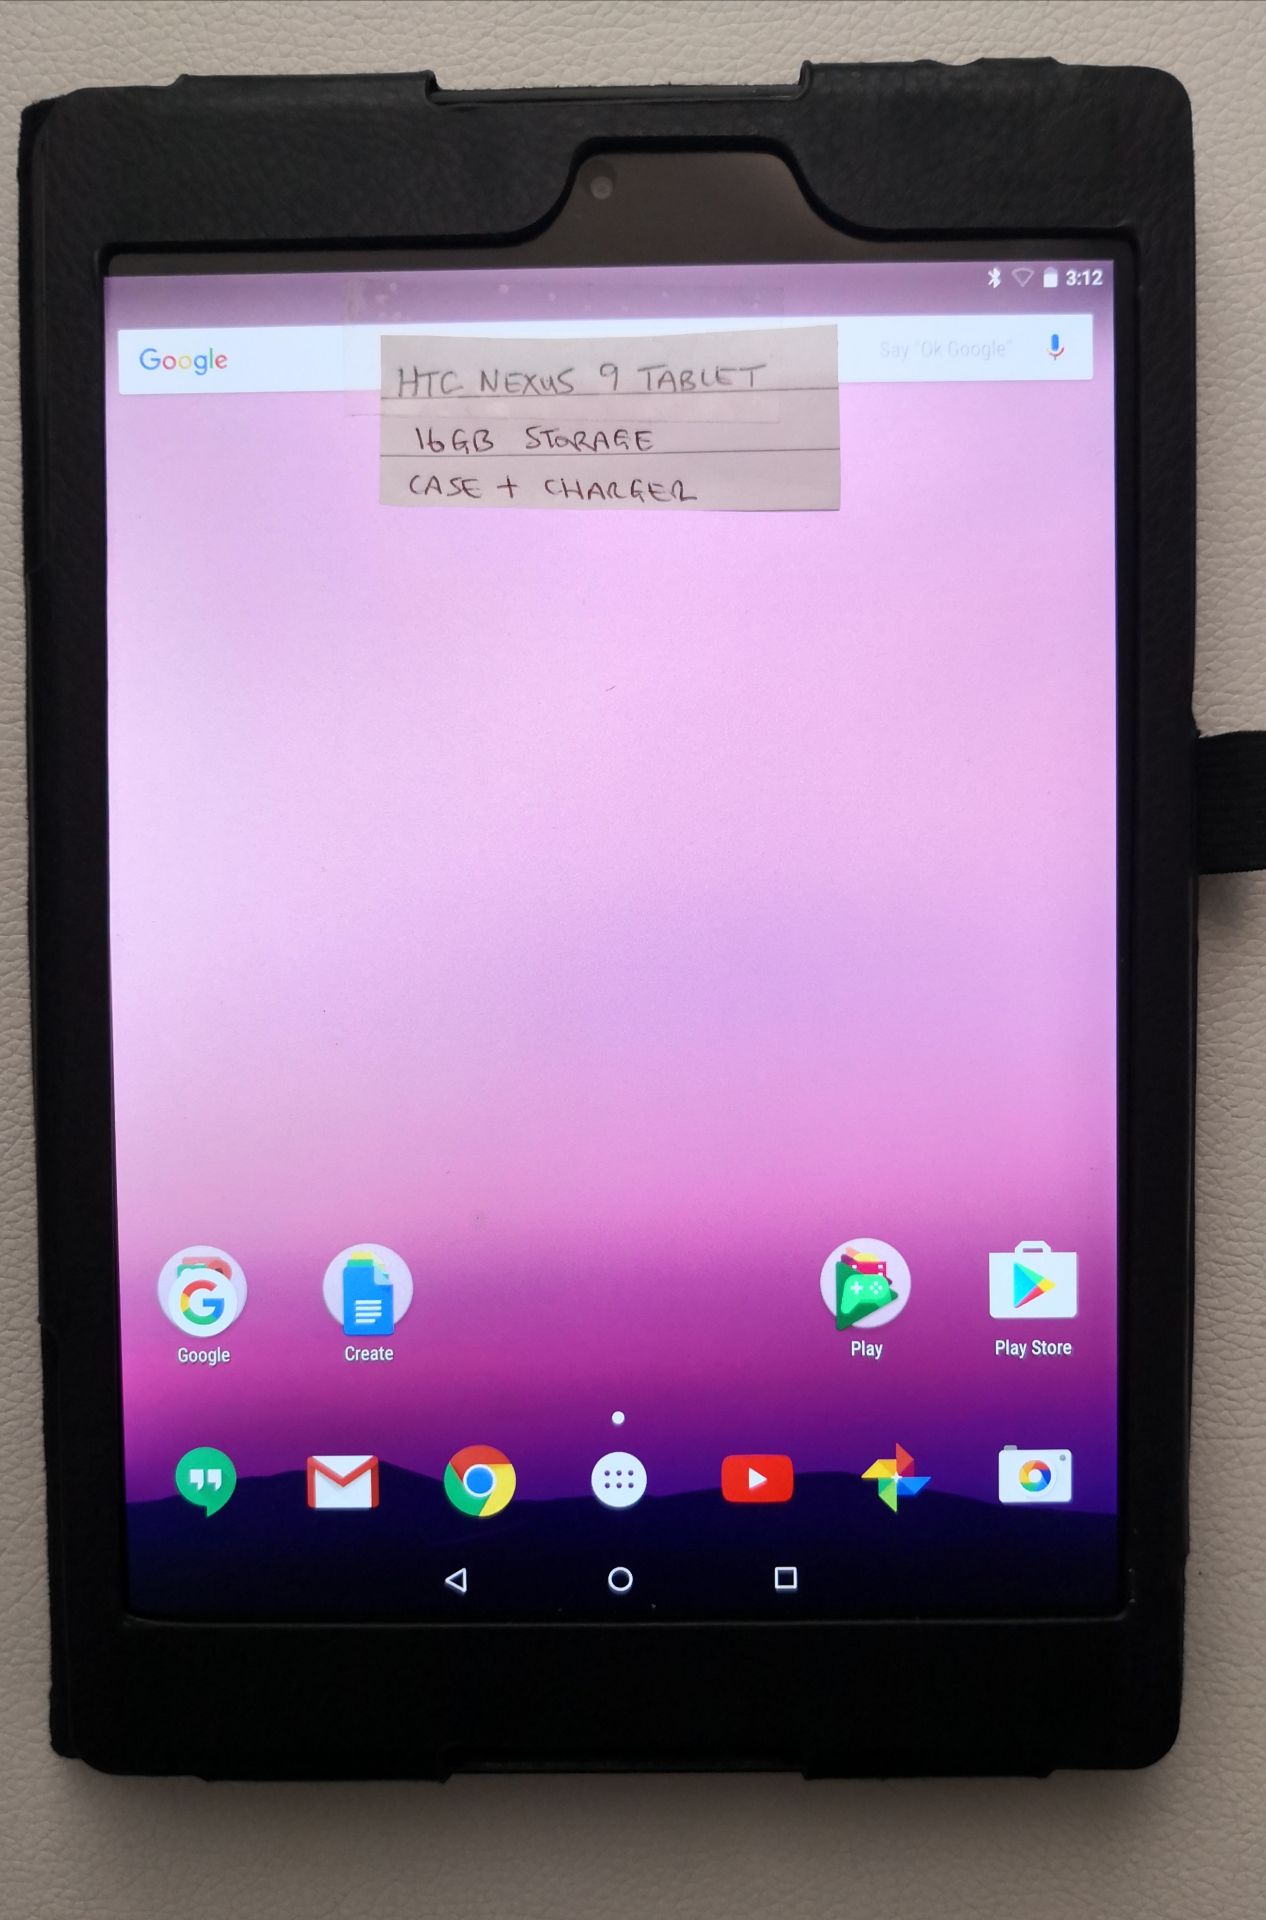 HTC NEXUS 9 TABLET 16GB STORAGE - WITH CASE + CHARGER - Image 2 of 2